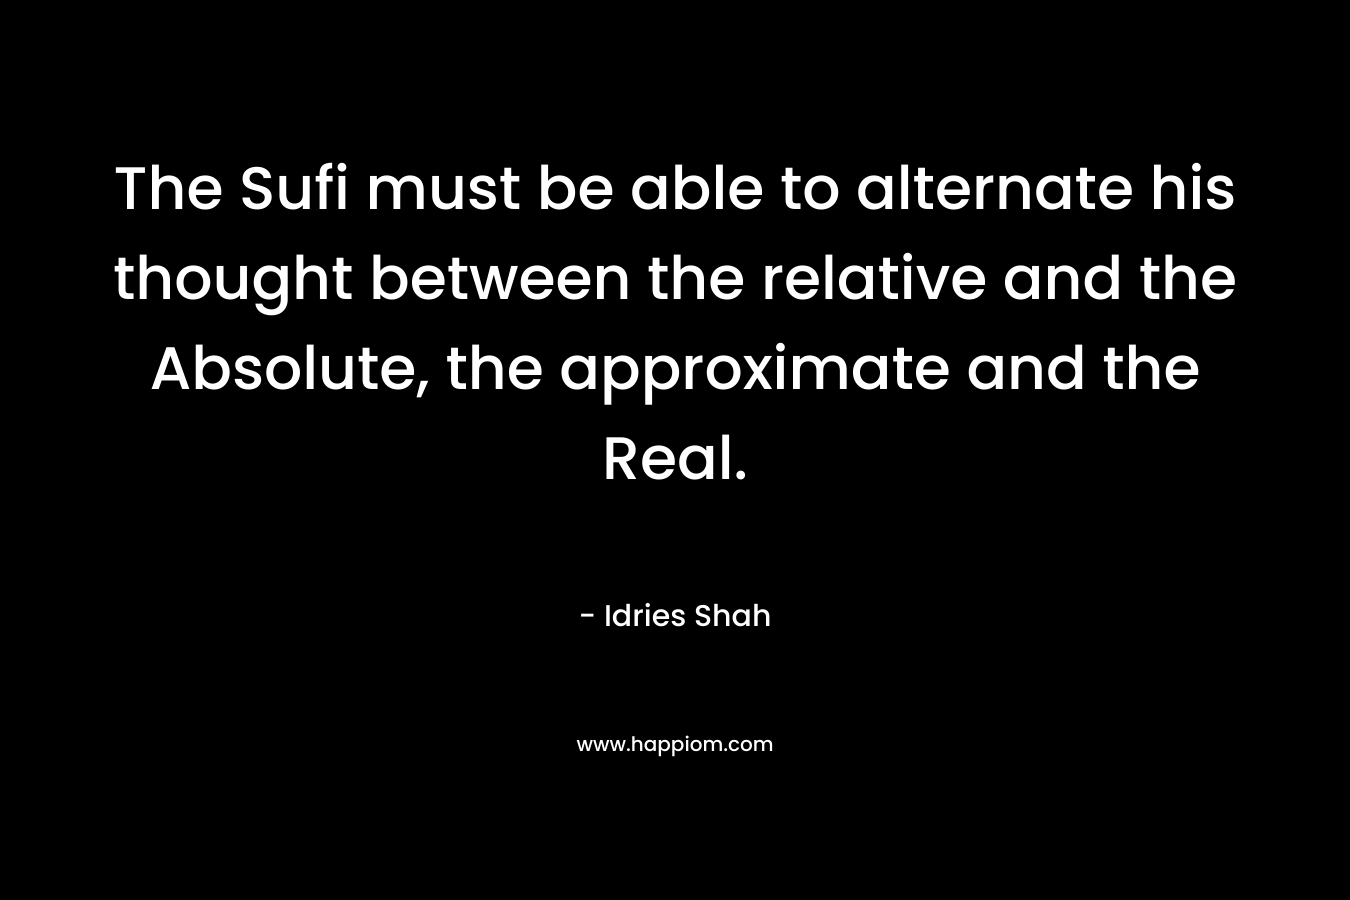 The Sufi must be able to alternate his thought between the relative and the Absolute, the approximate and the Real. – Idries Shah